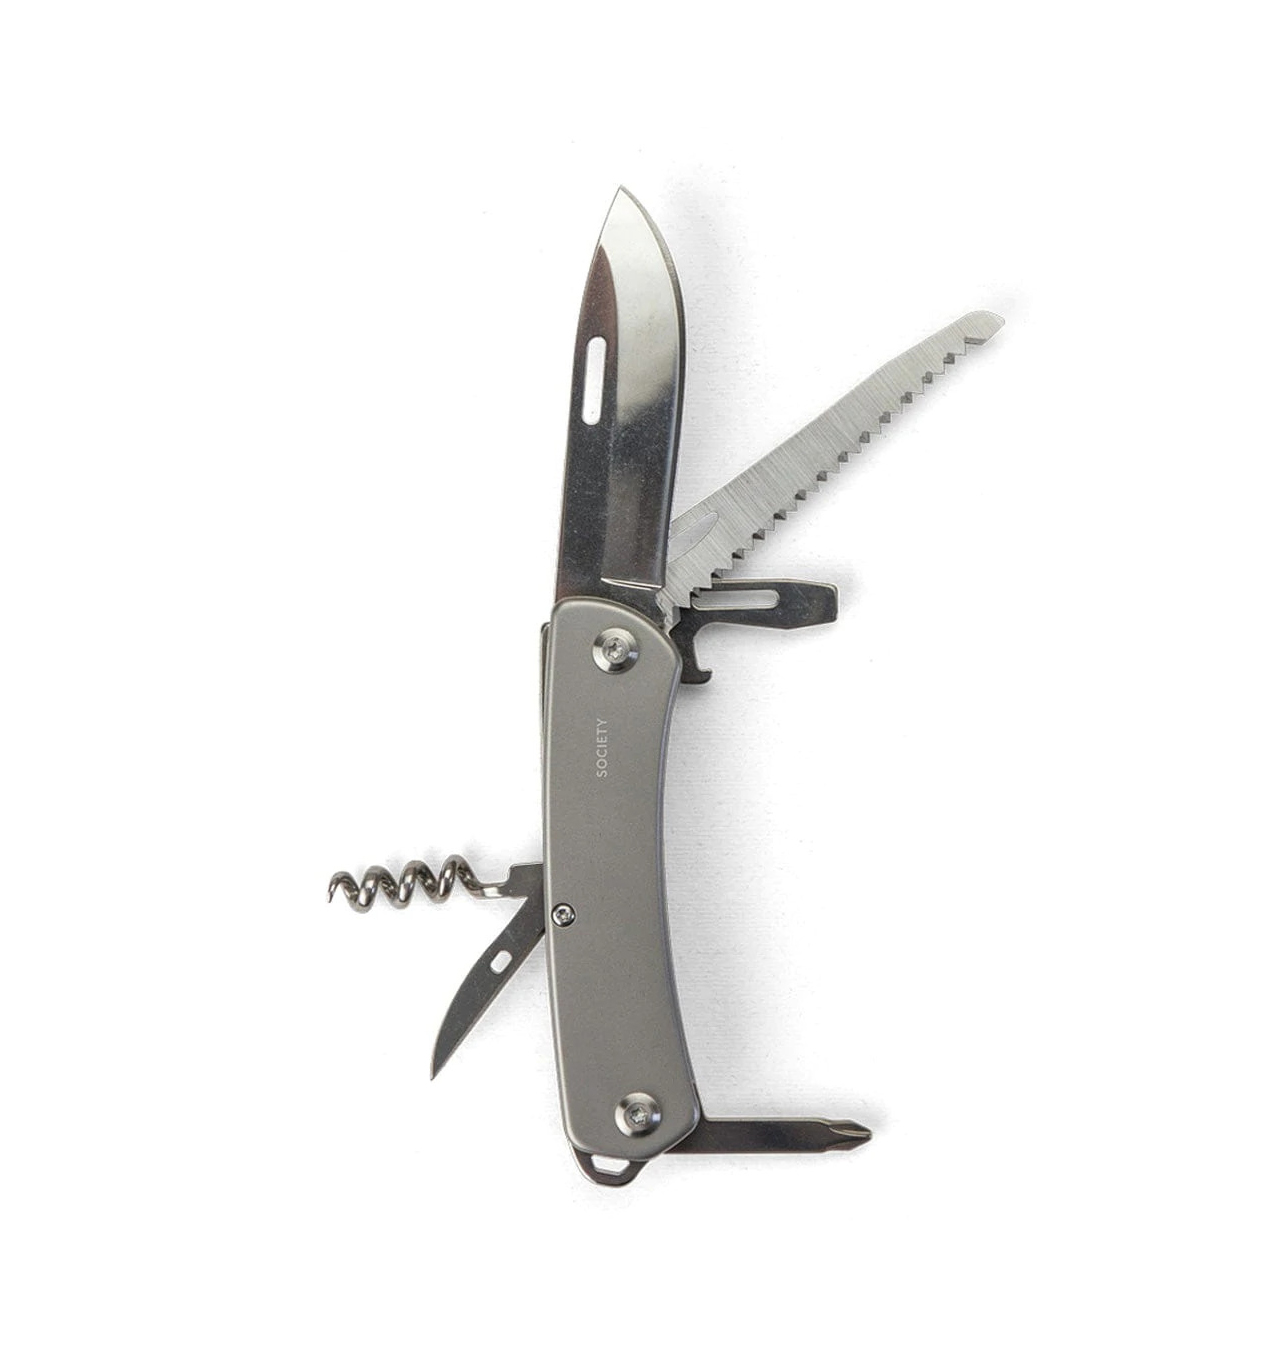 Society - Into The Wild Multi Tool - Stainless Steel